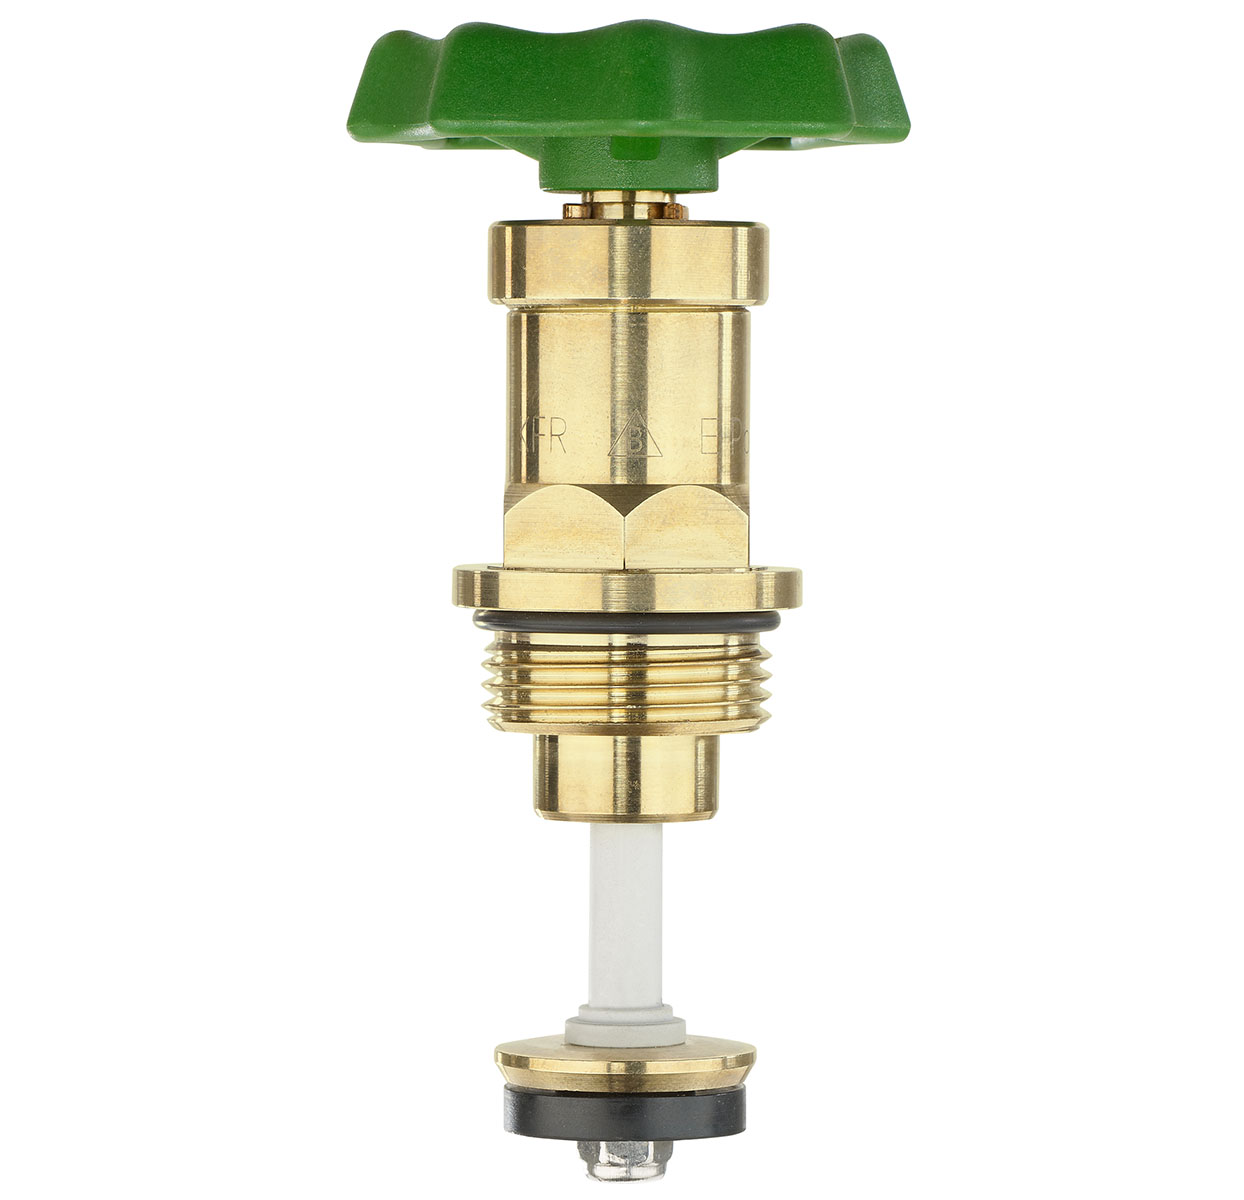 1275320 - Cuphin Upper-part with grease chamber SOFT-drive-system, for Combined Free-flow and Backflow-preventer valves, not-rising spindle